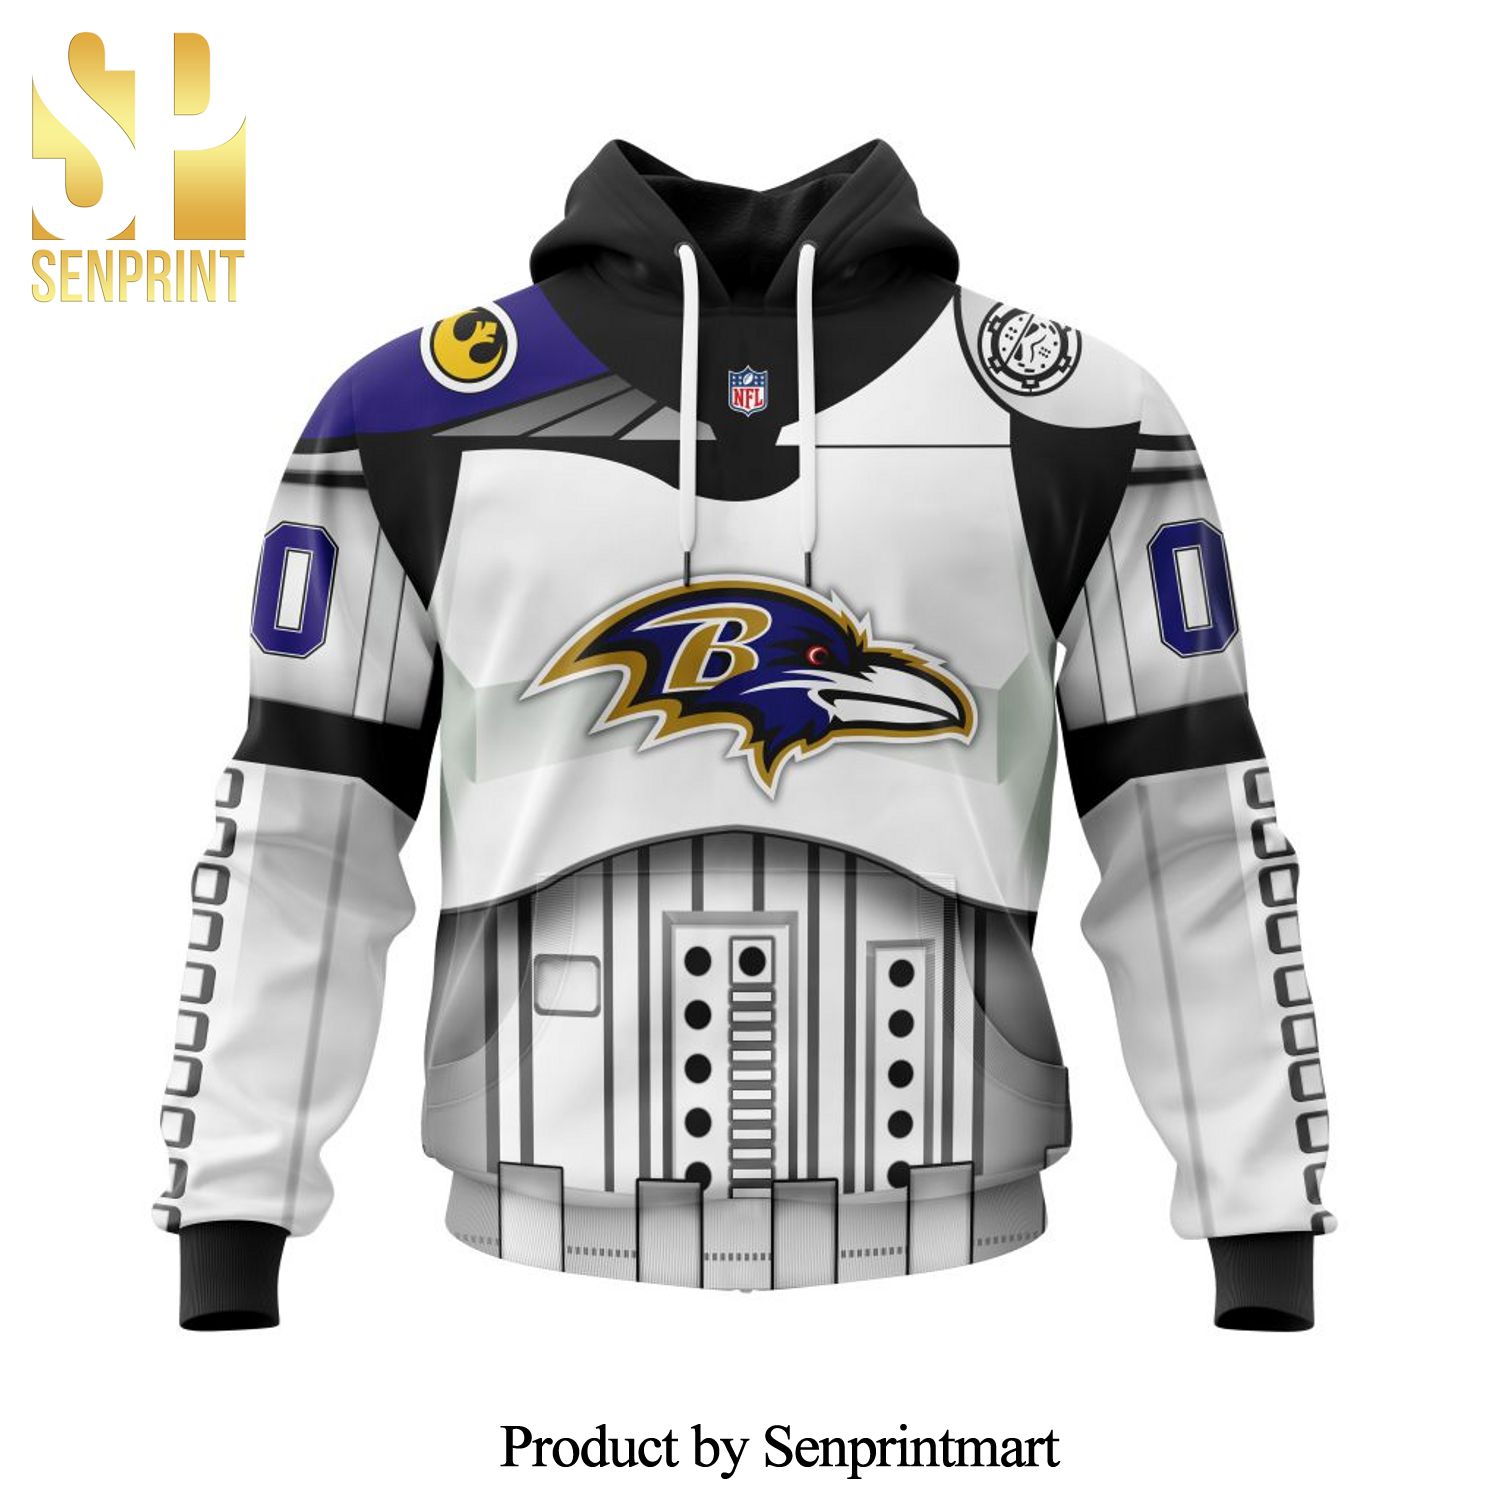 Baltimore Ravens Version Star Wars May The 4th Be With You All Over Printed Shirt